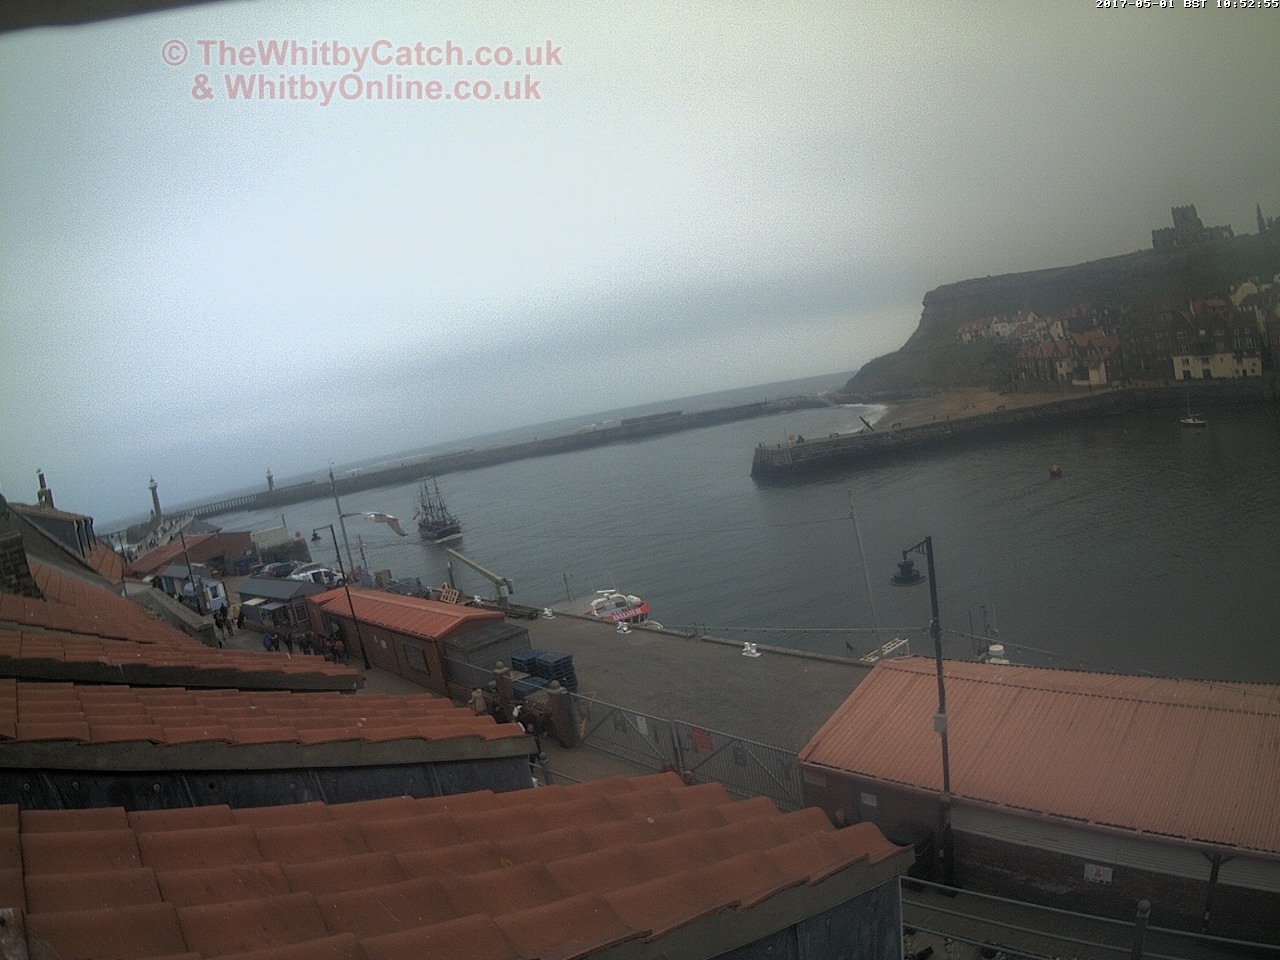 Whitby Mon 1st May 2017 10:53.